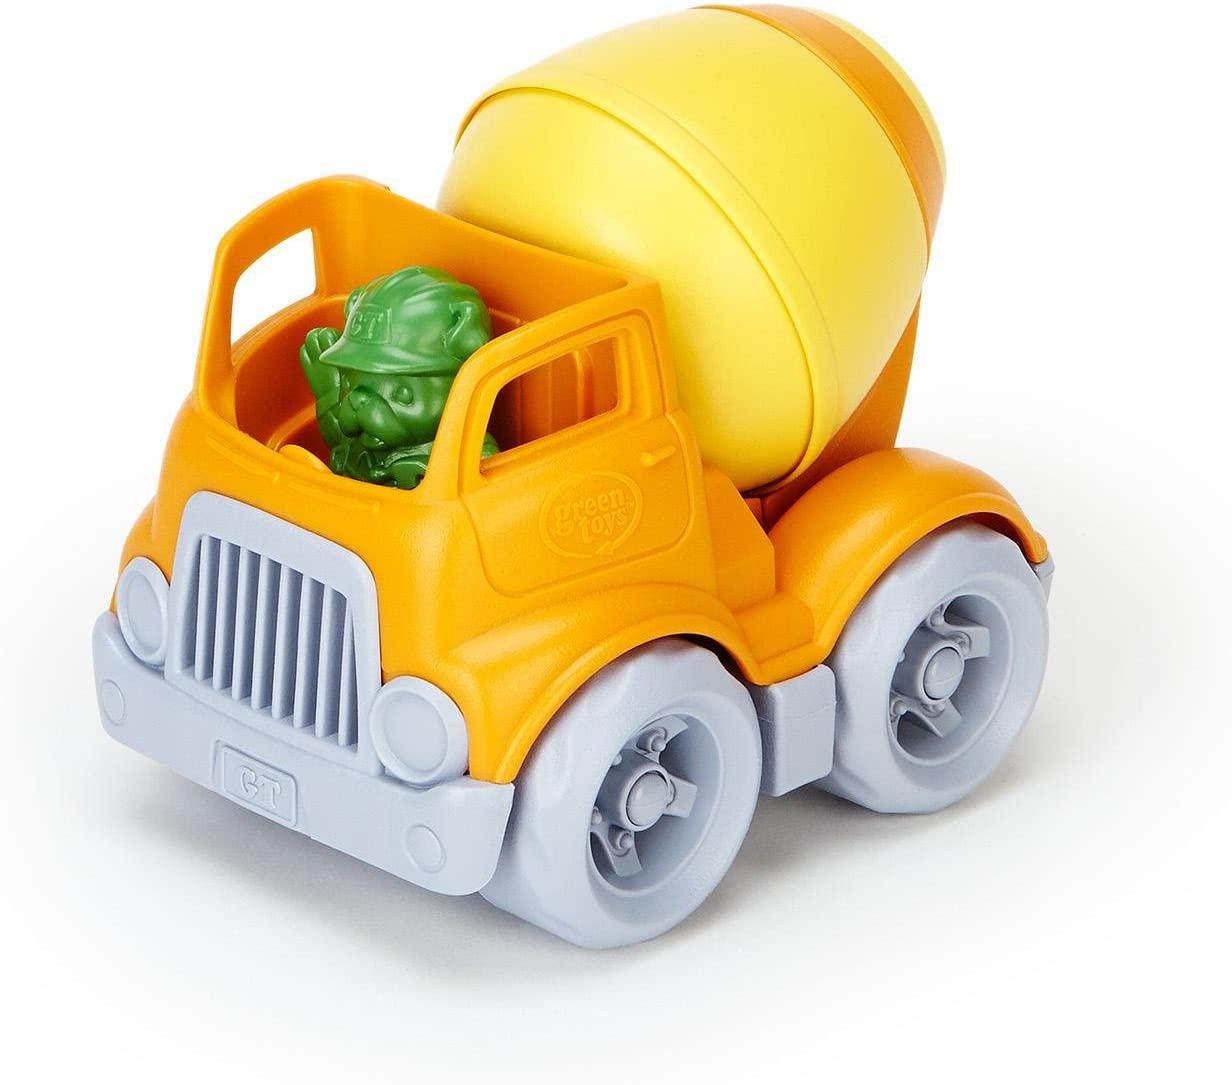 Green Toys Eco Friendly Mixer made from recycled plastic